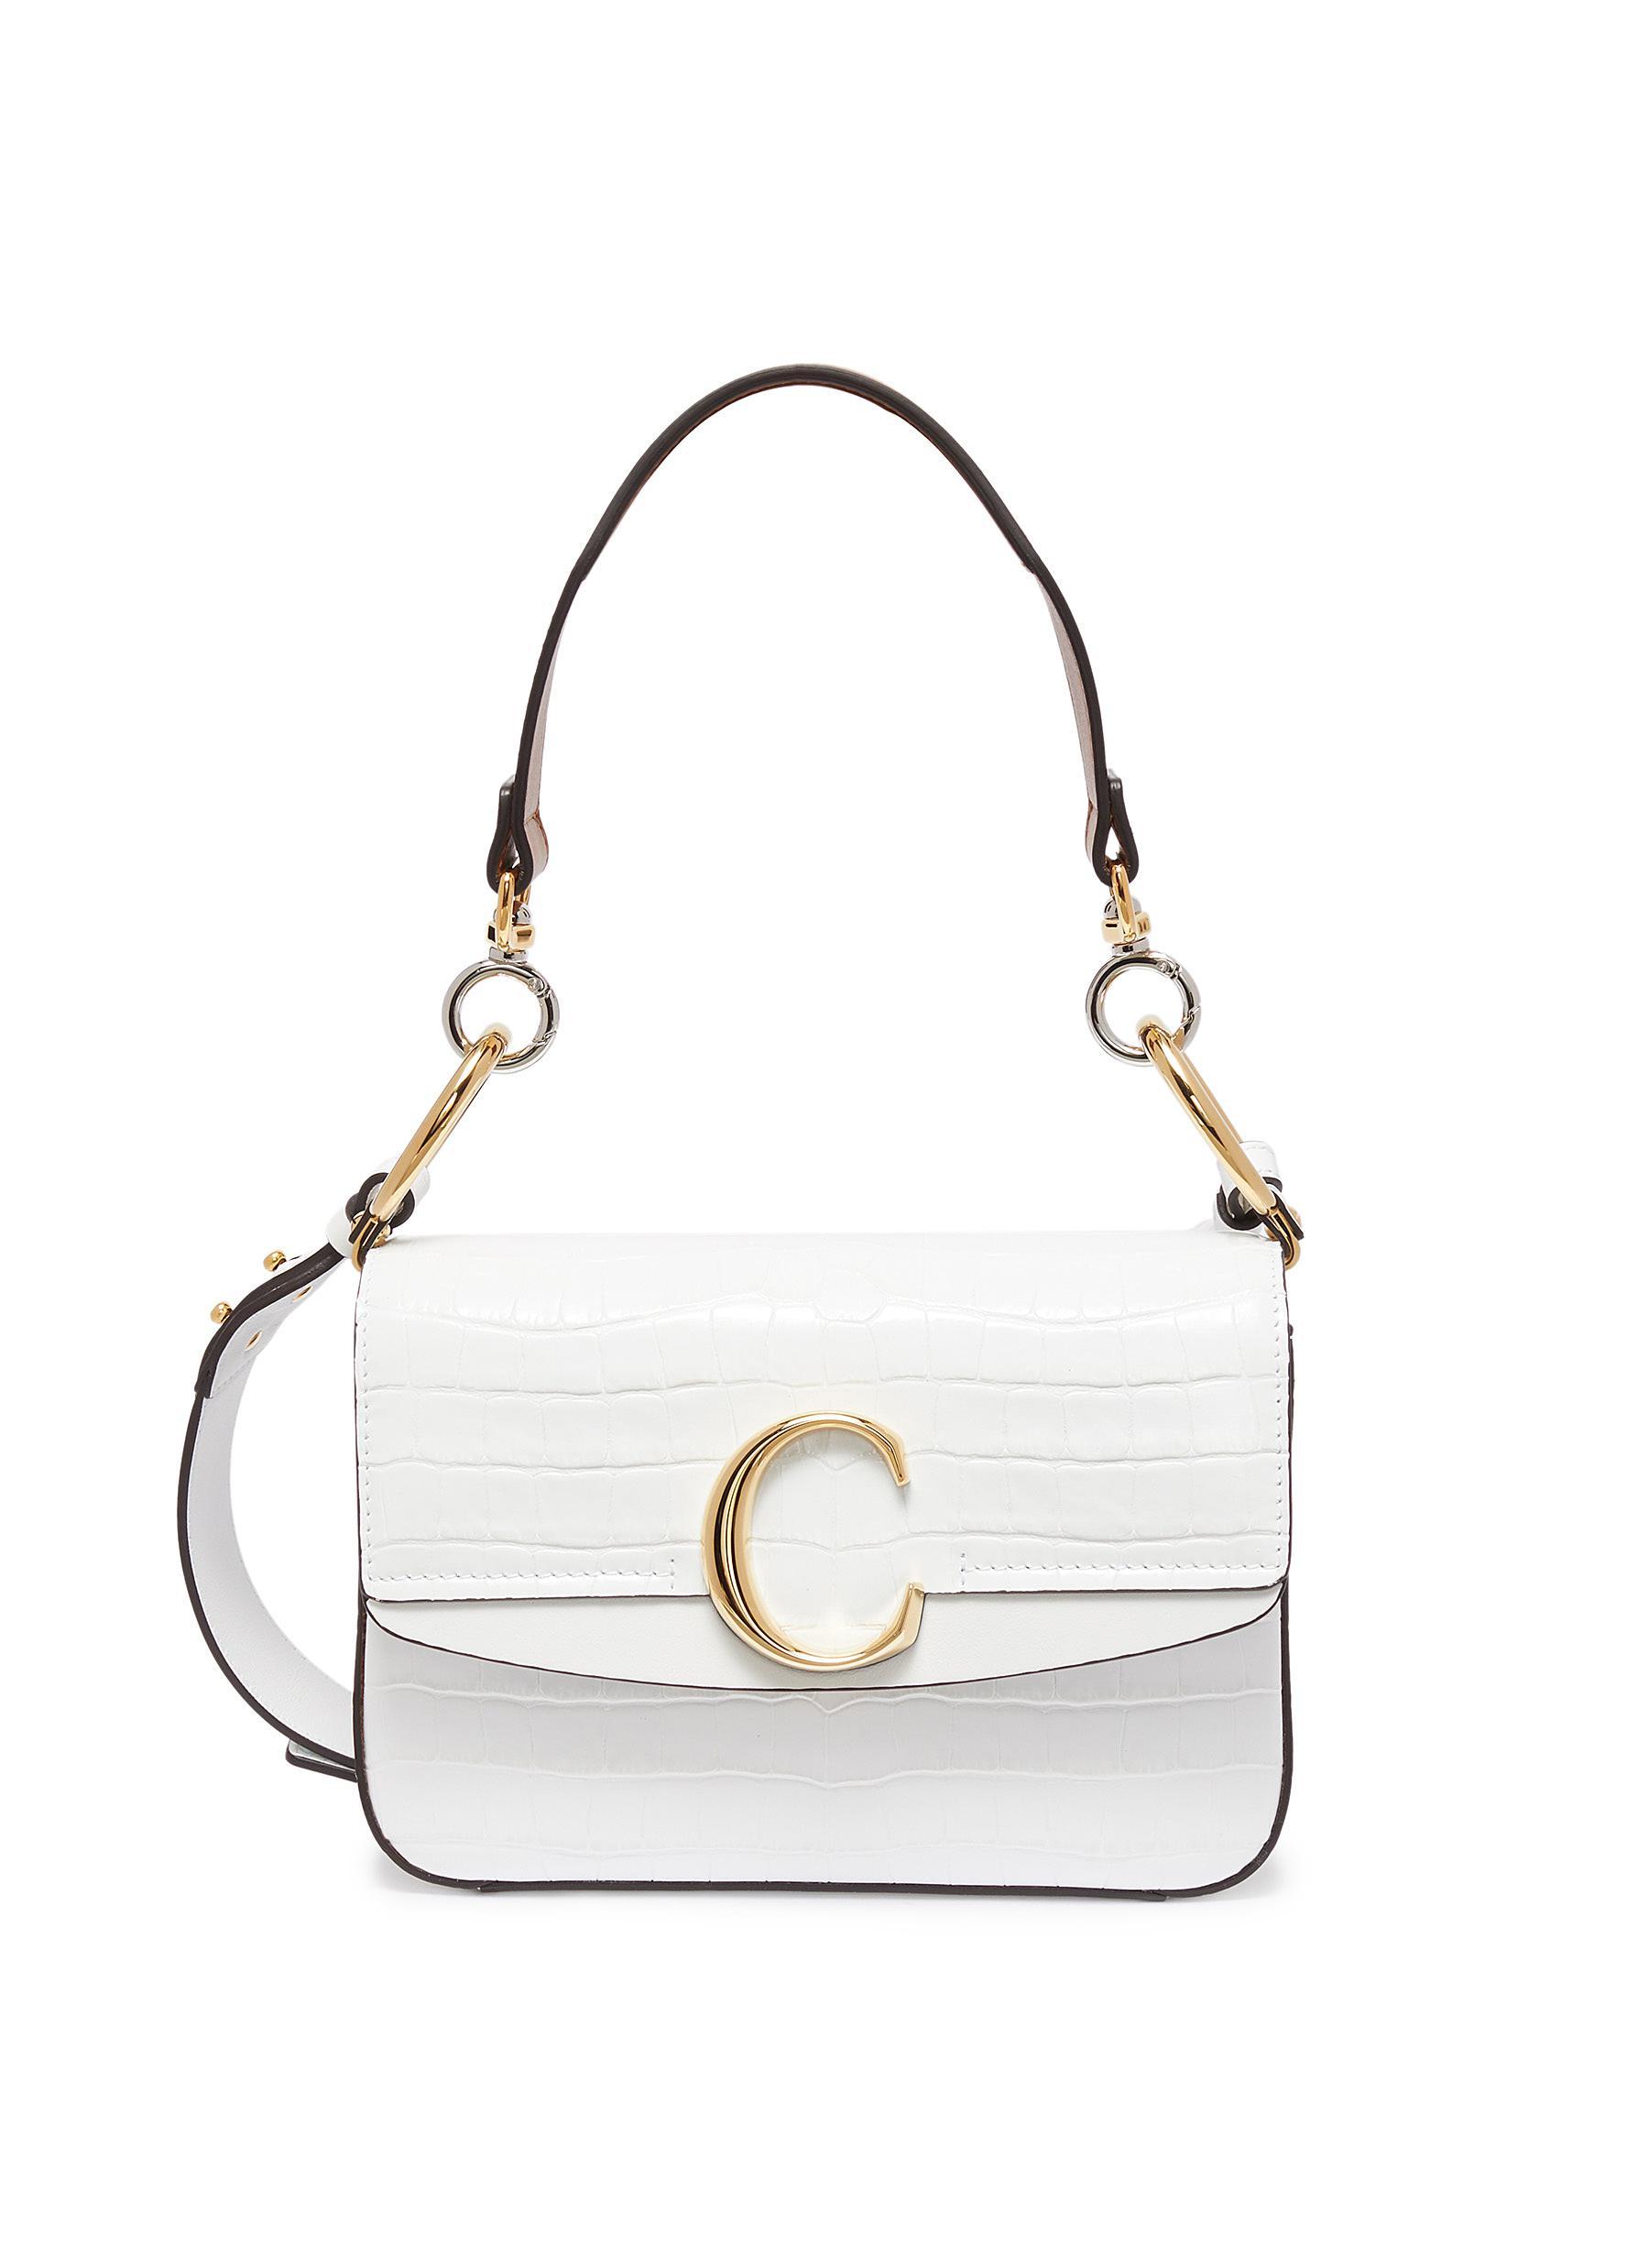 Chloé 'chloé C' Small Croc Embossed Leather Double Carry Bag in White ...